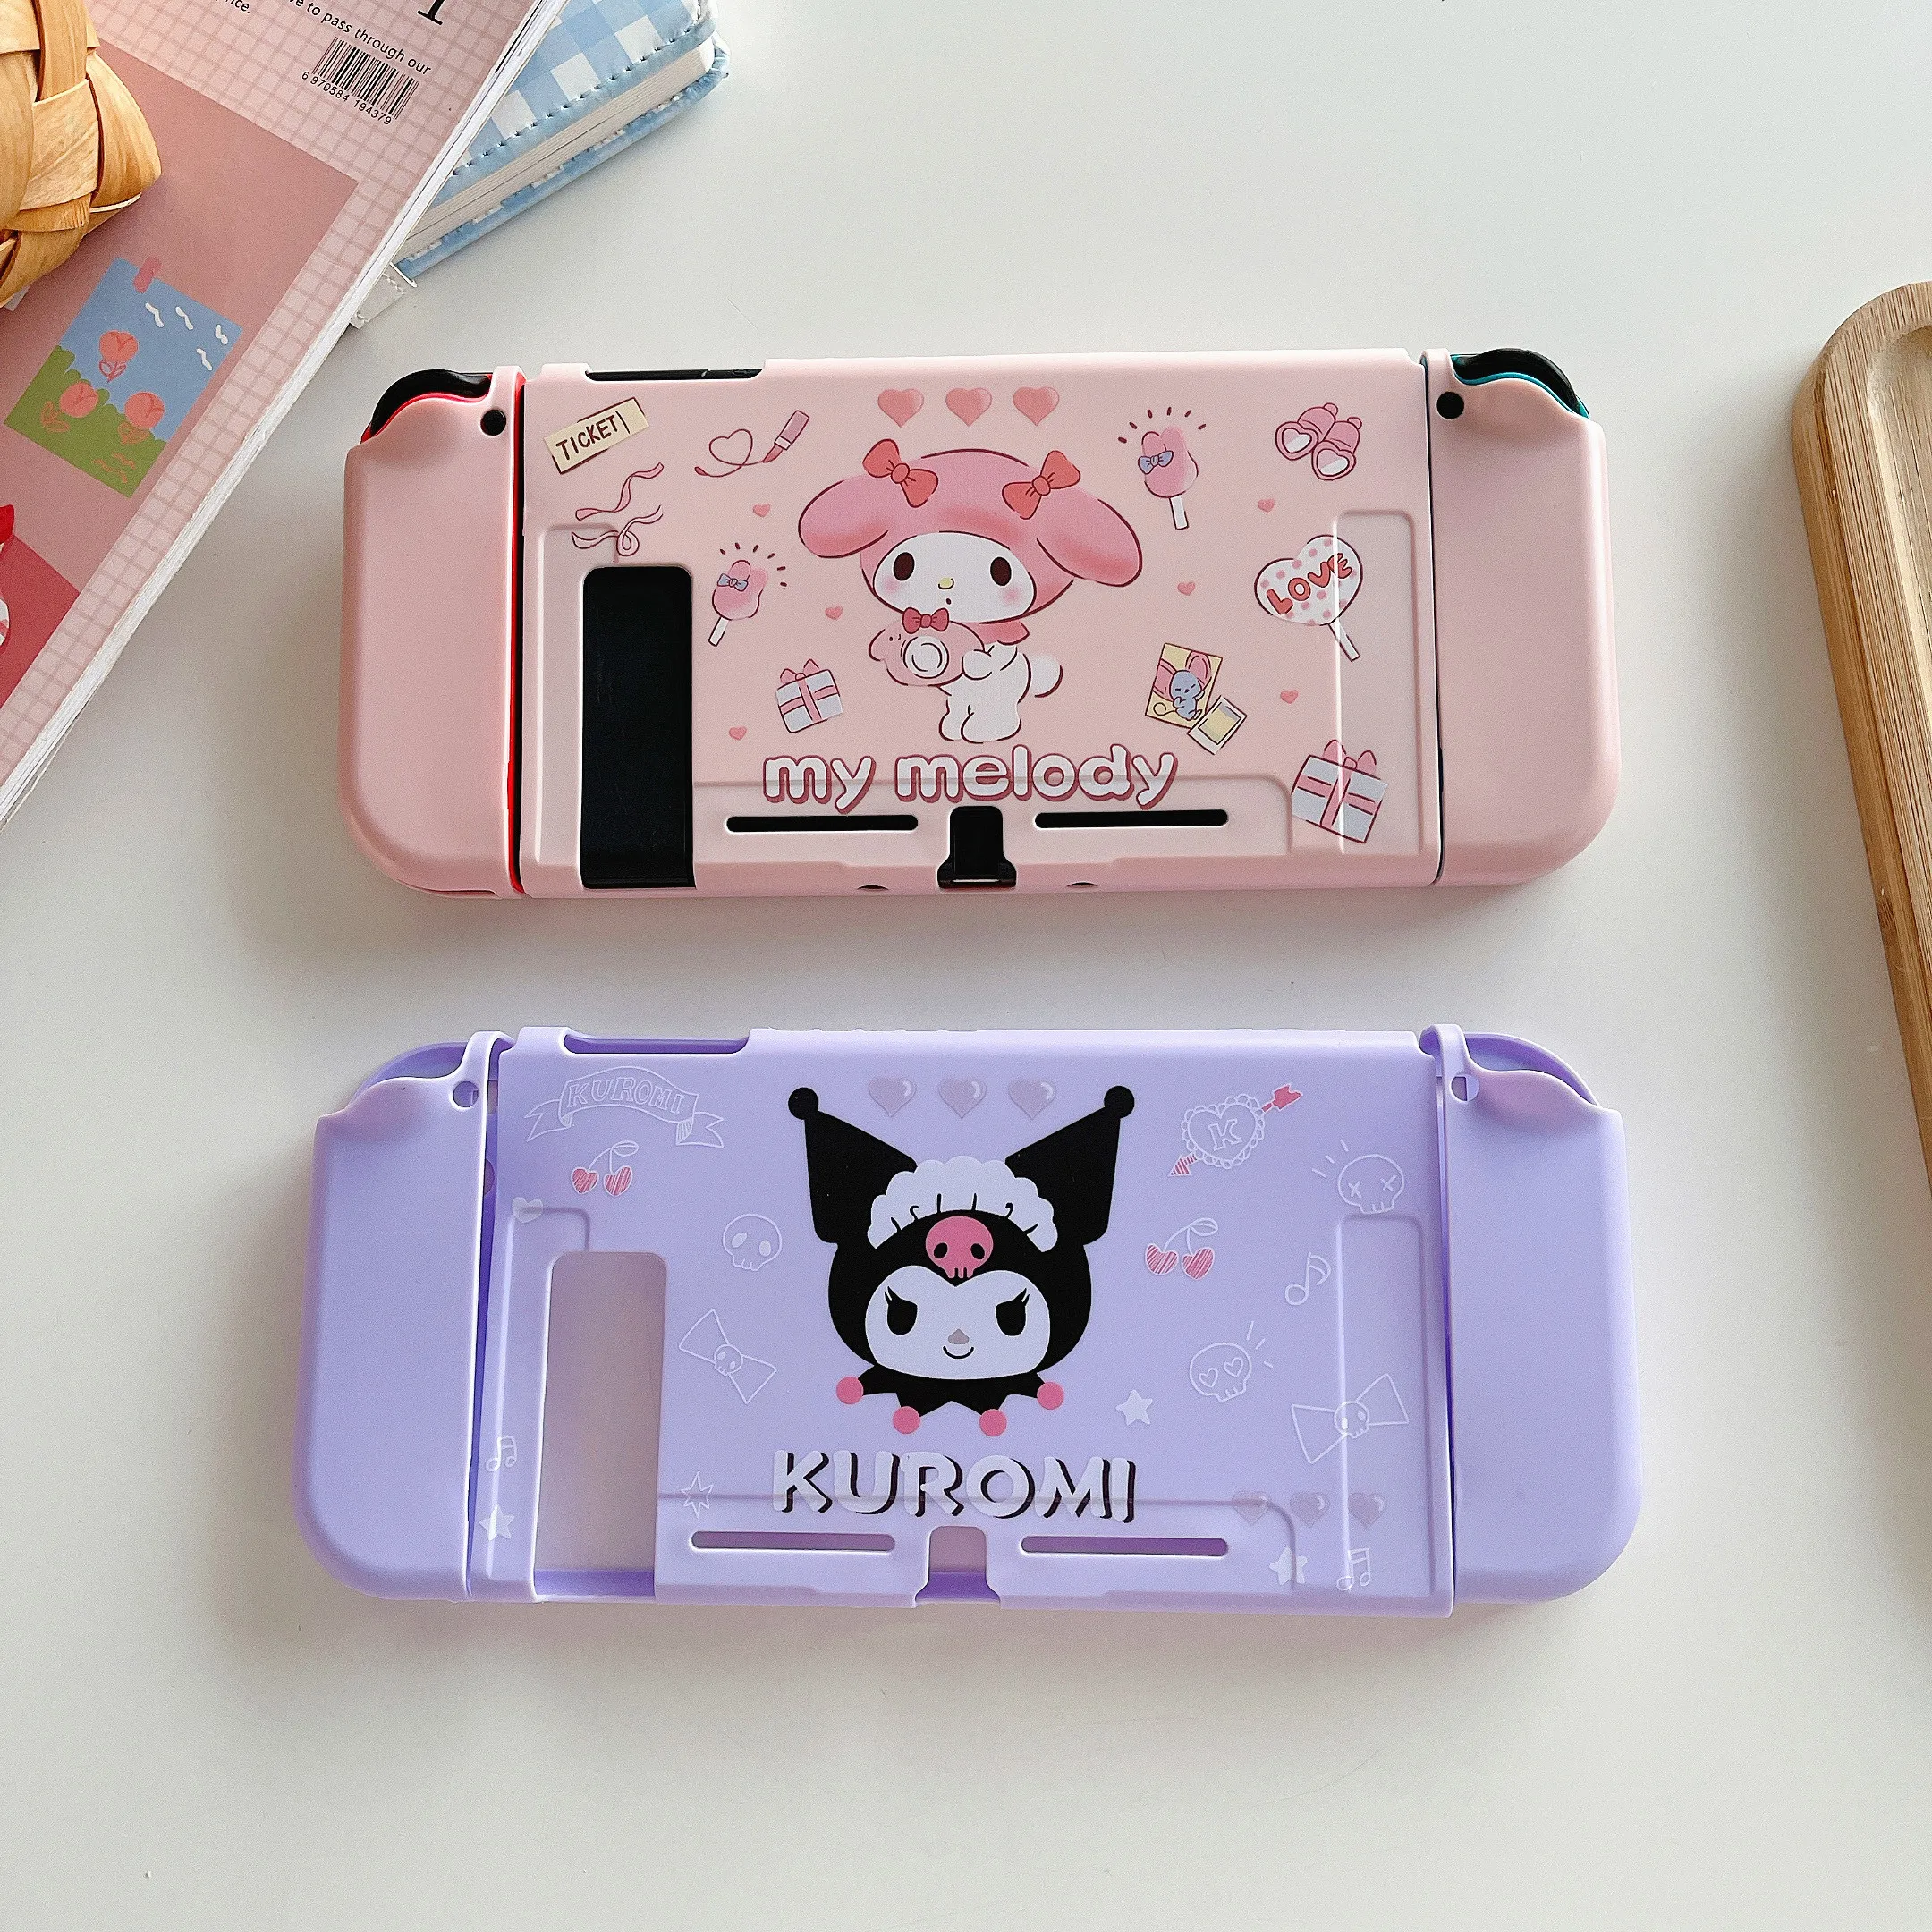 

Sanrio Kuromi My Melody Pink Gudetama XO Soft Phone Cases For Nintendo Switch Game Console Controller OLED Gaming Accessories